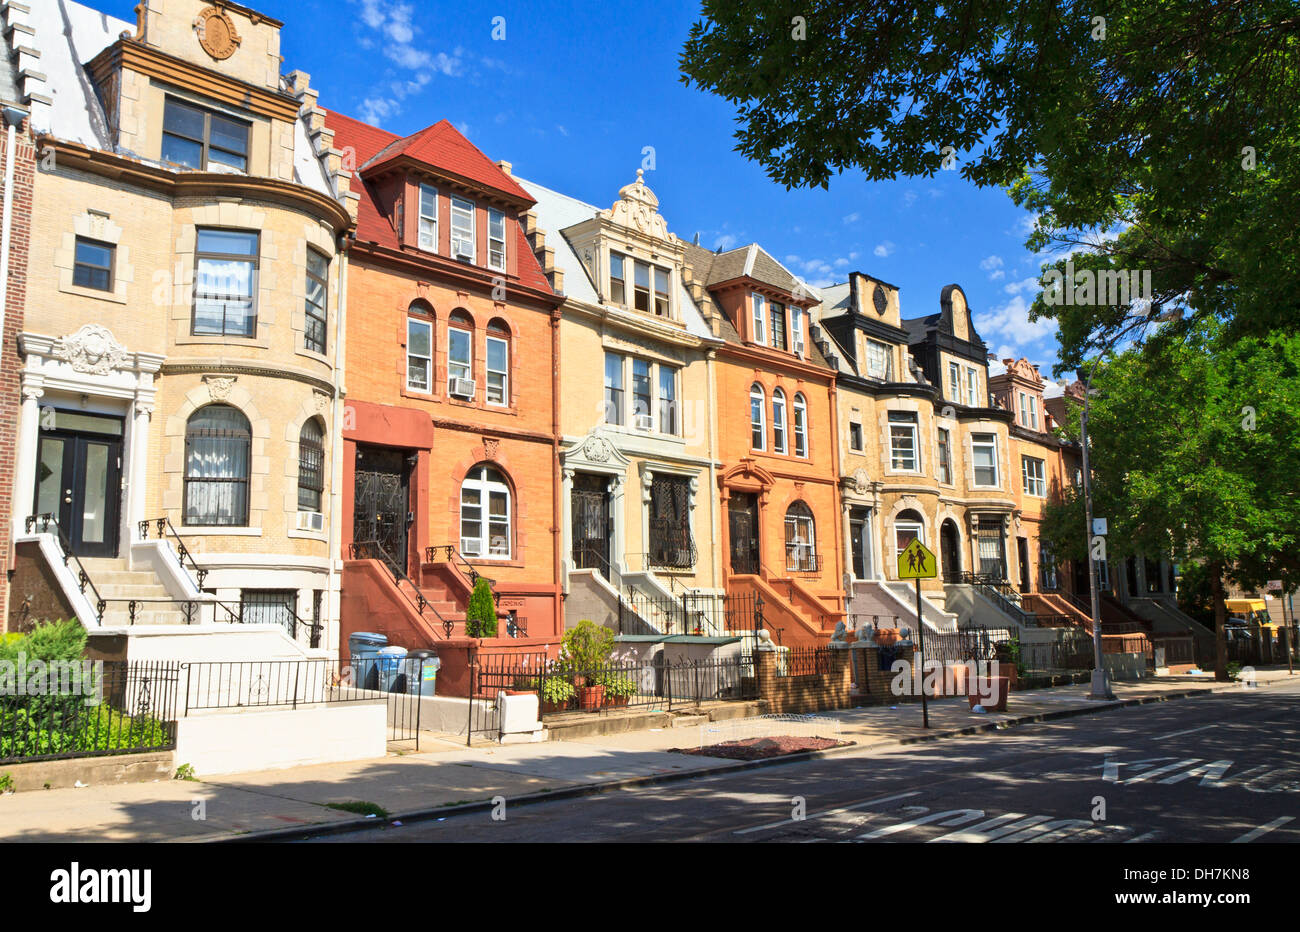 A row of unique townhouse apartment buildings with stoops on New York Ave. in the Crown Heights neighborhood of Brooklyn, NY Stock Photo